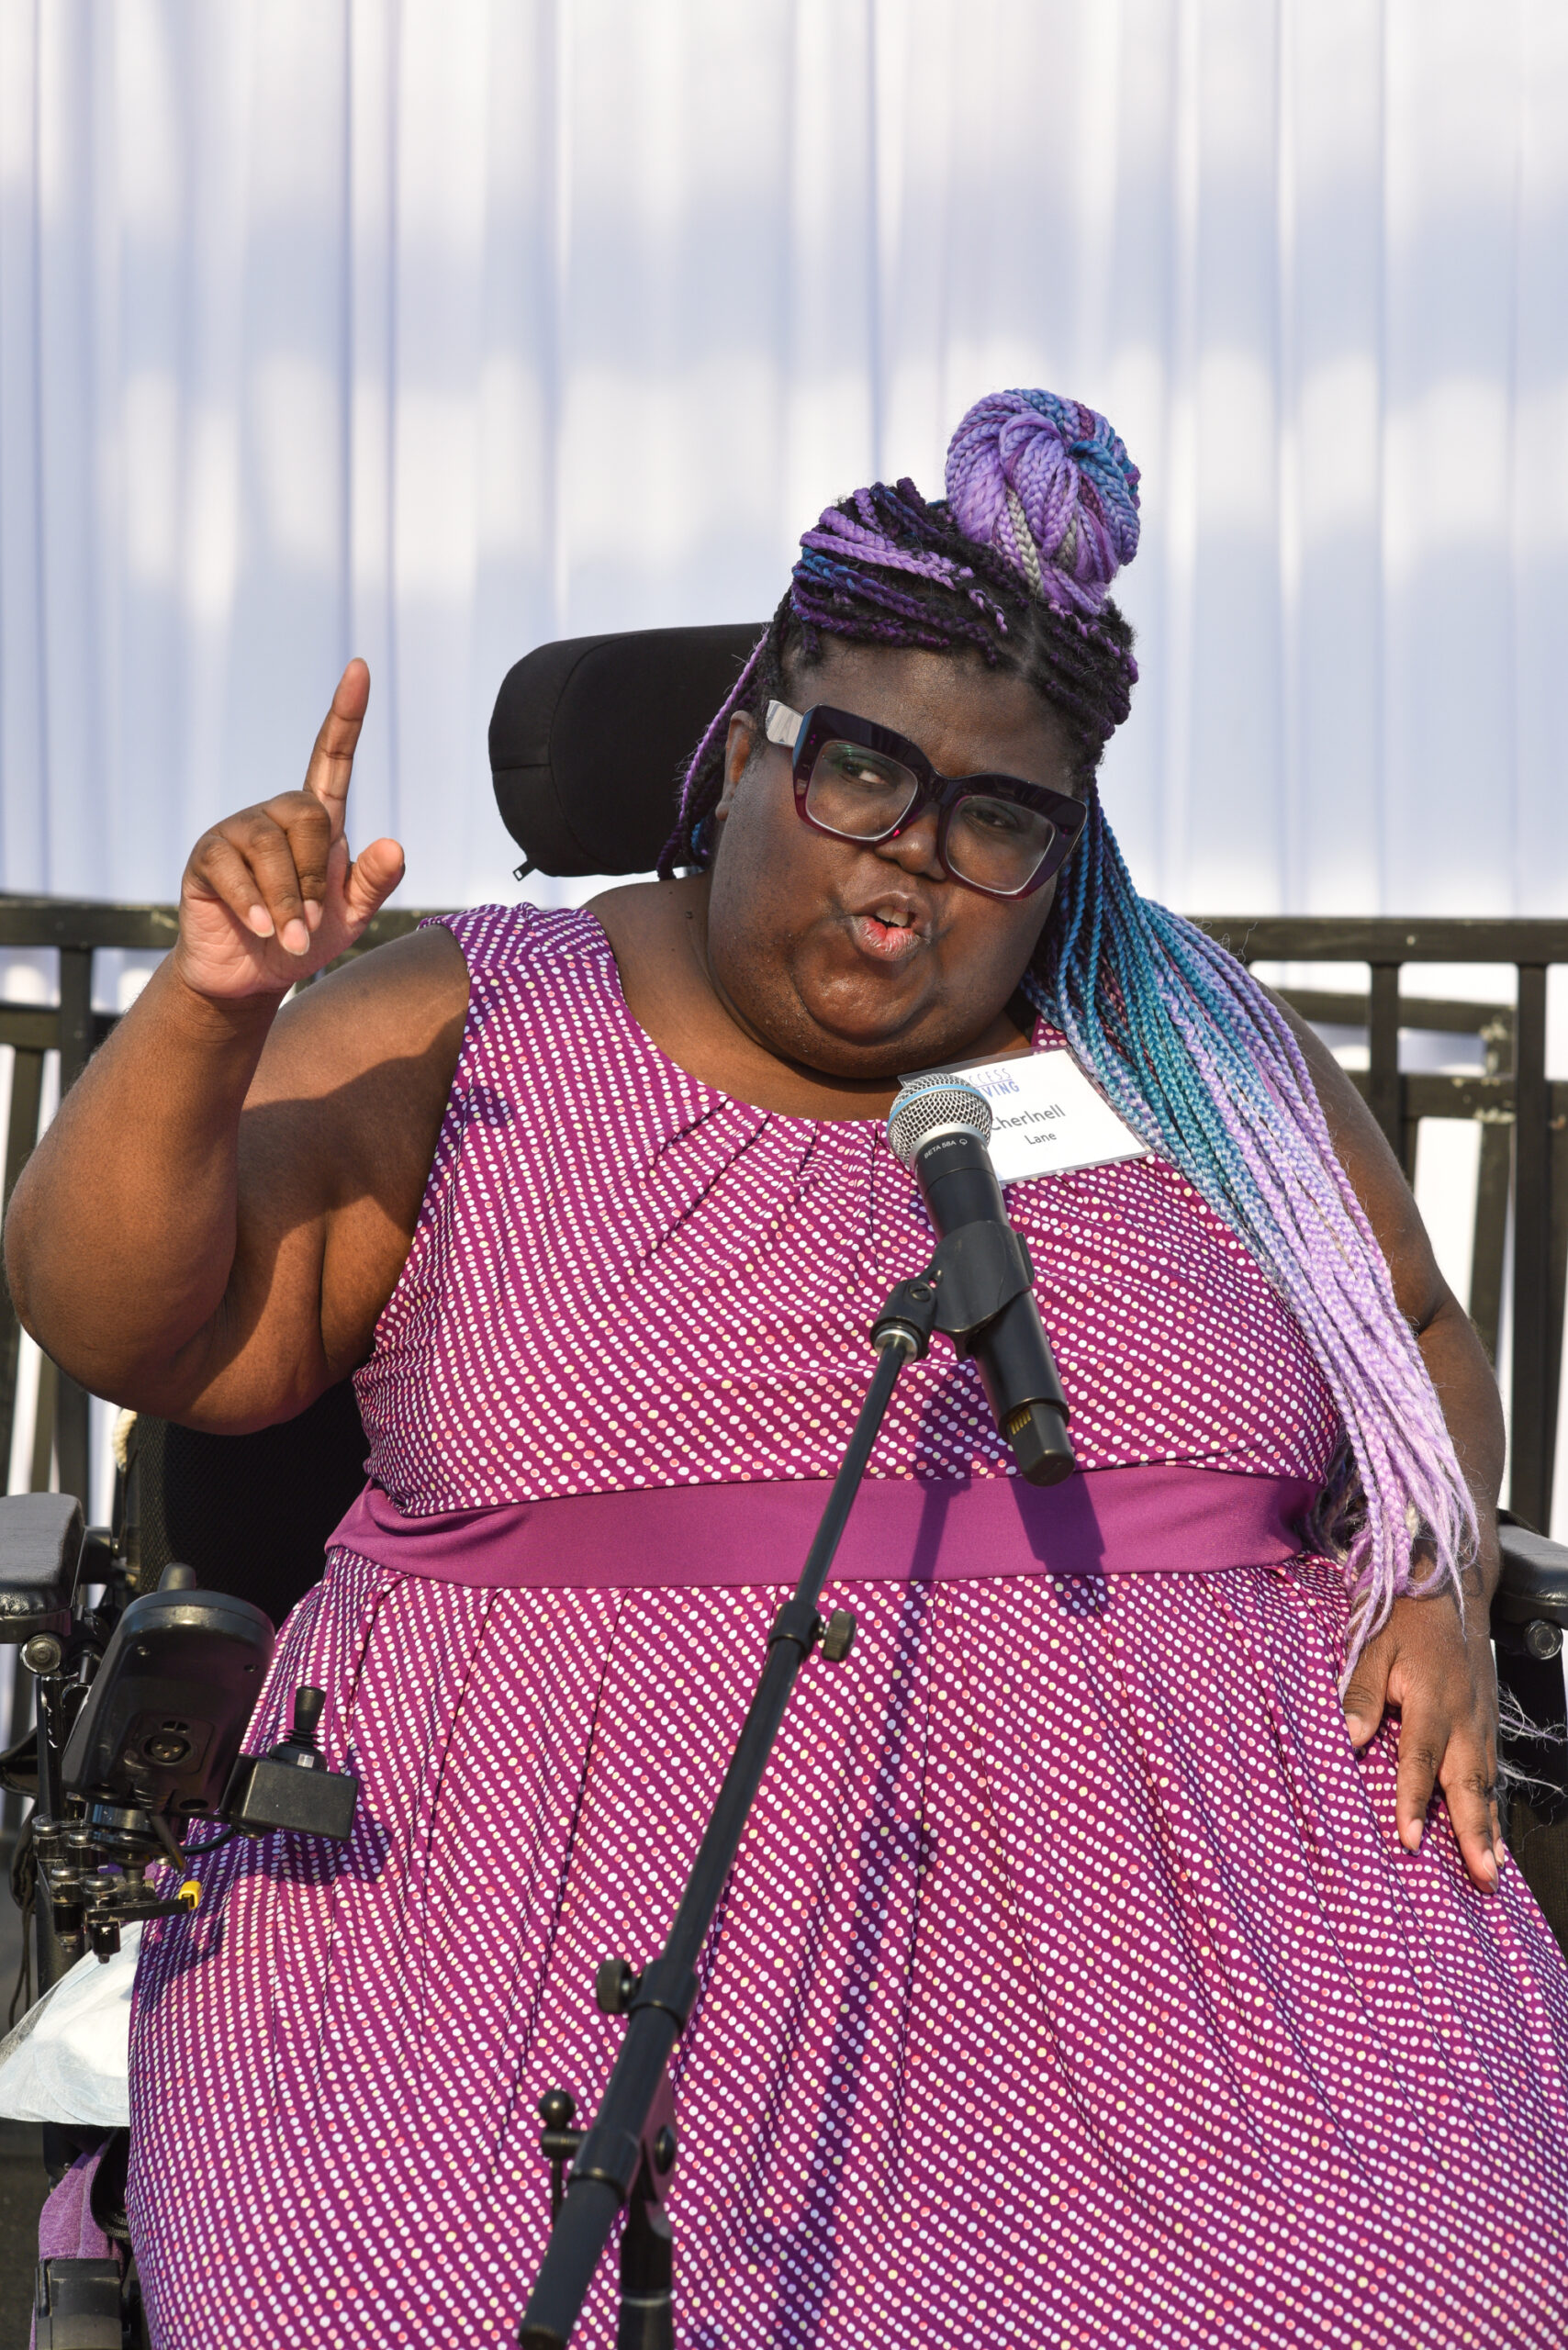 Black woman in wheelchair at a microphone